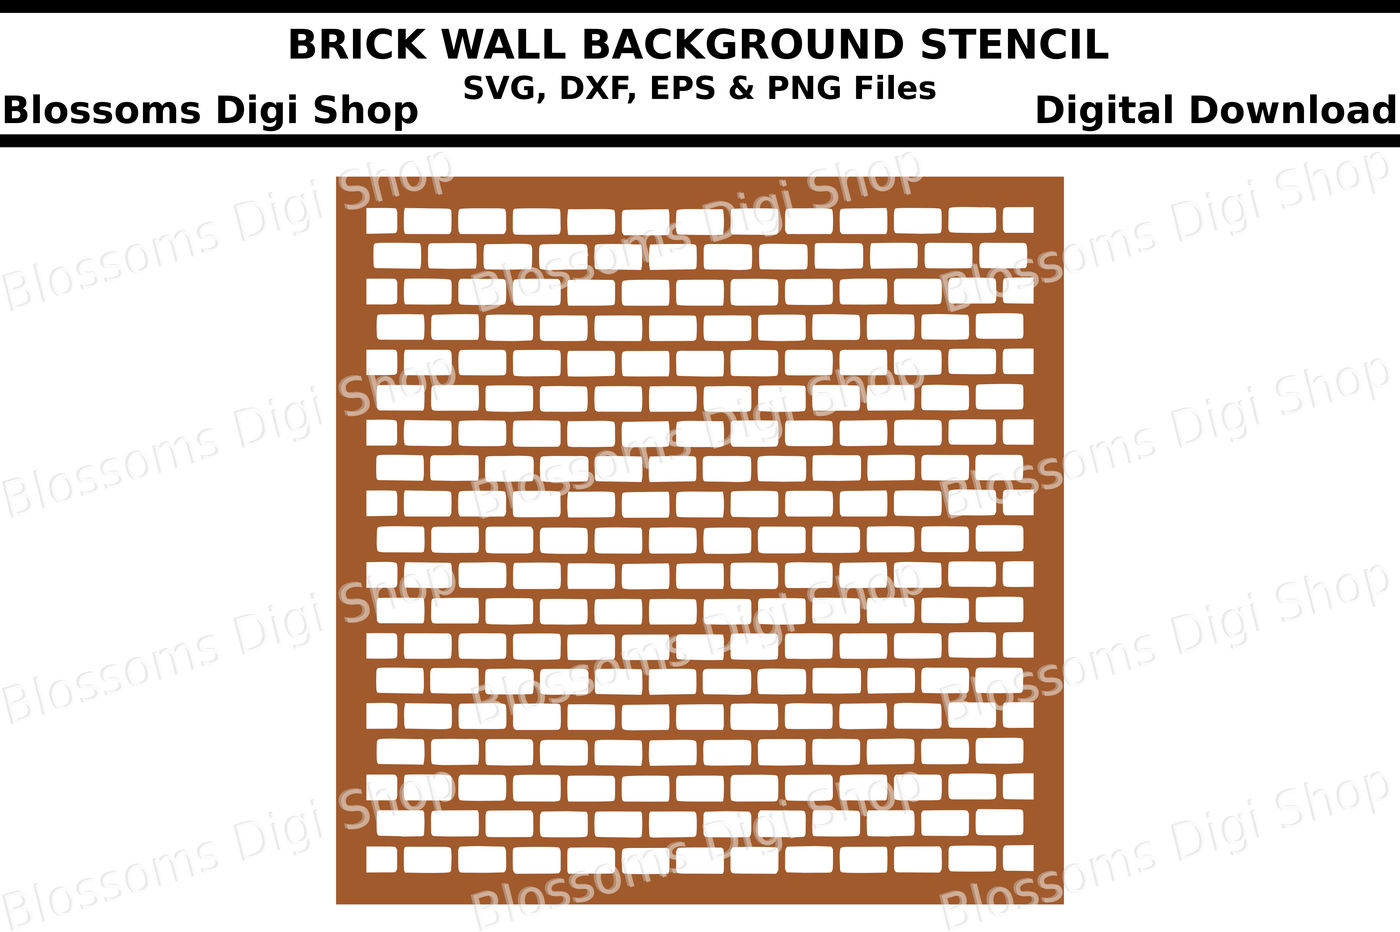 Brick Wall Background Stencil Svg Dxf Eps And Png Files By Blossoms Digi Shop Thehungryjpeg Com